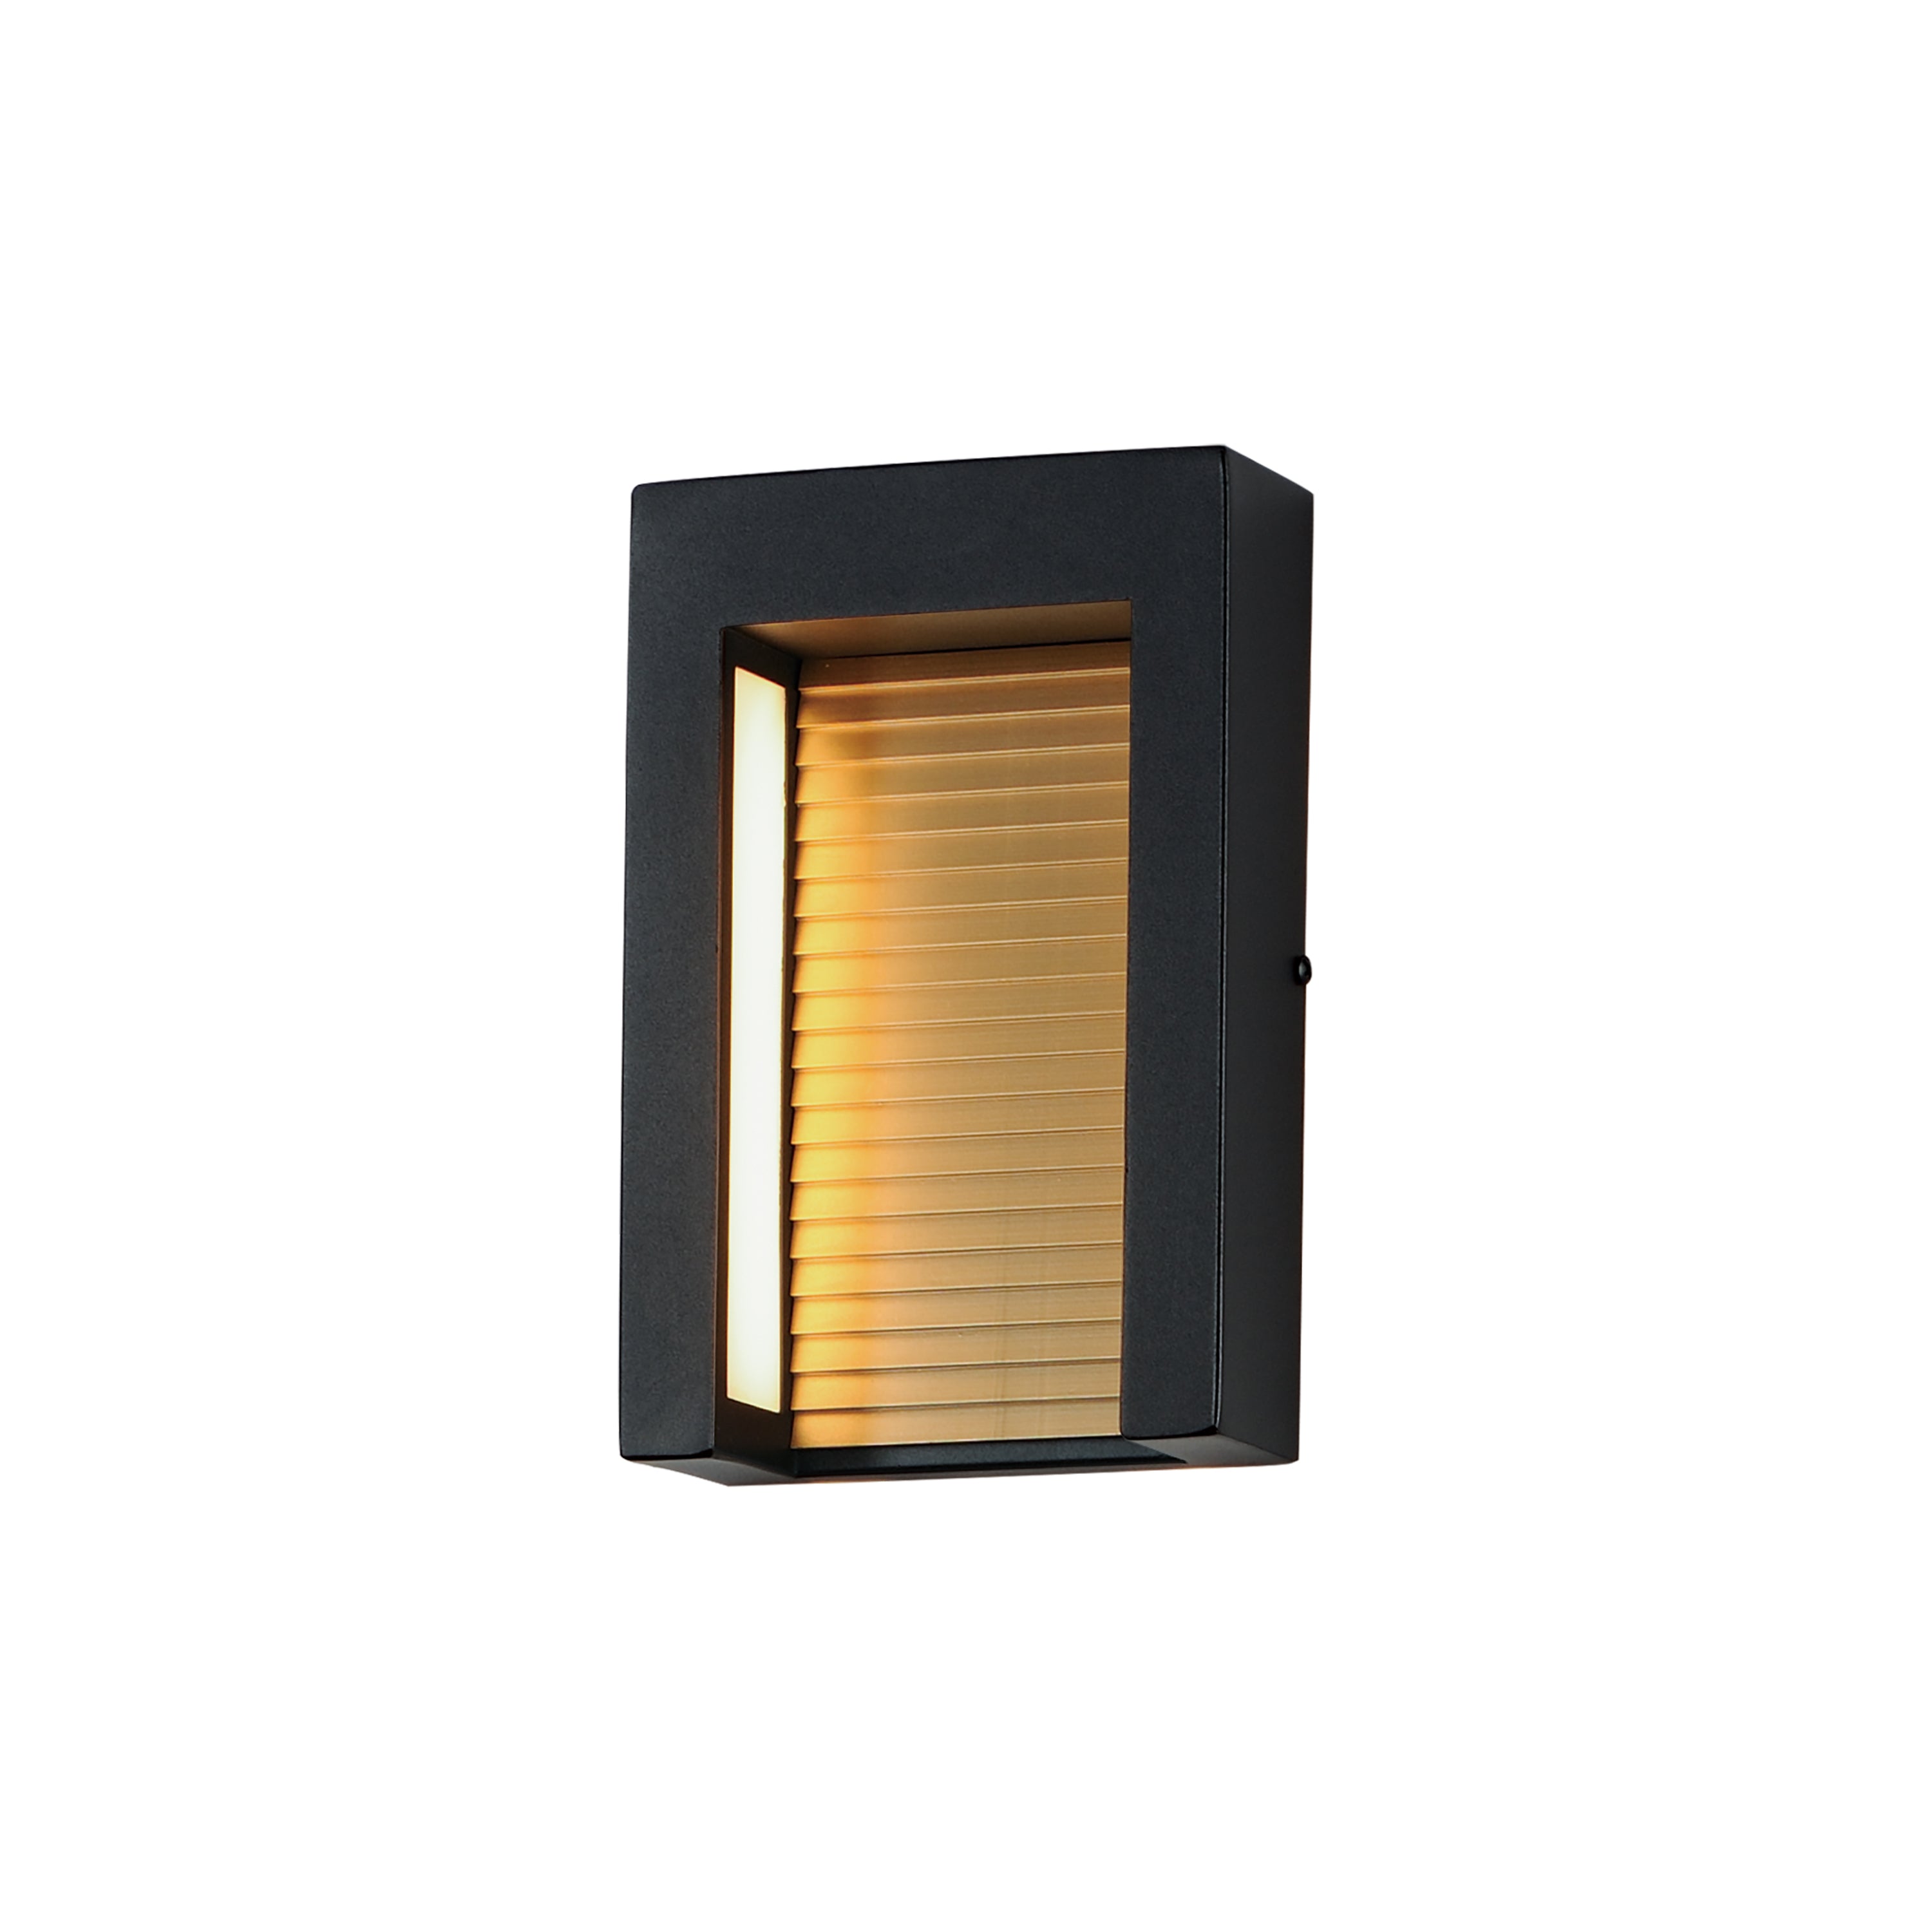 Alcove-Outdoor Wall Mount Outdoor l Wall ET2 x6.5x10 Black / Gold 